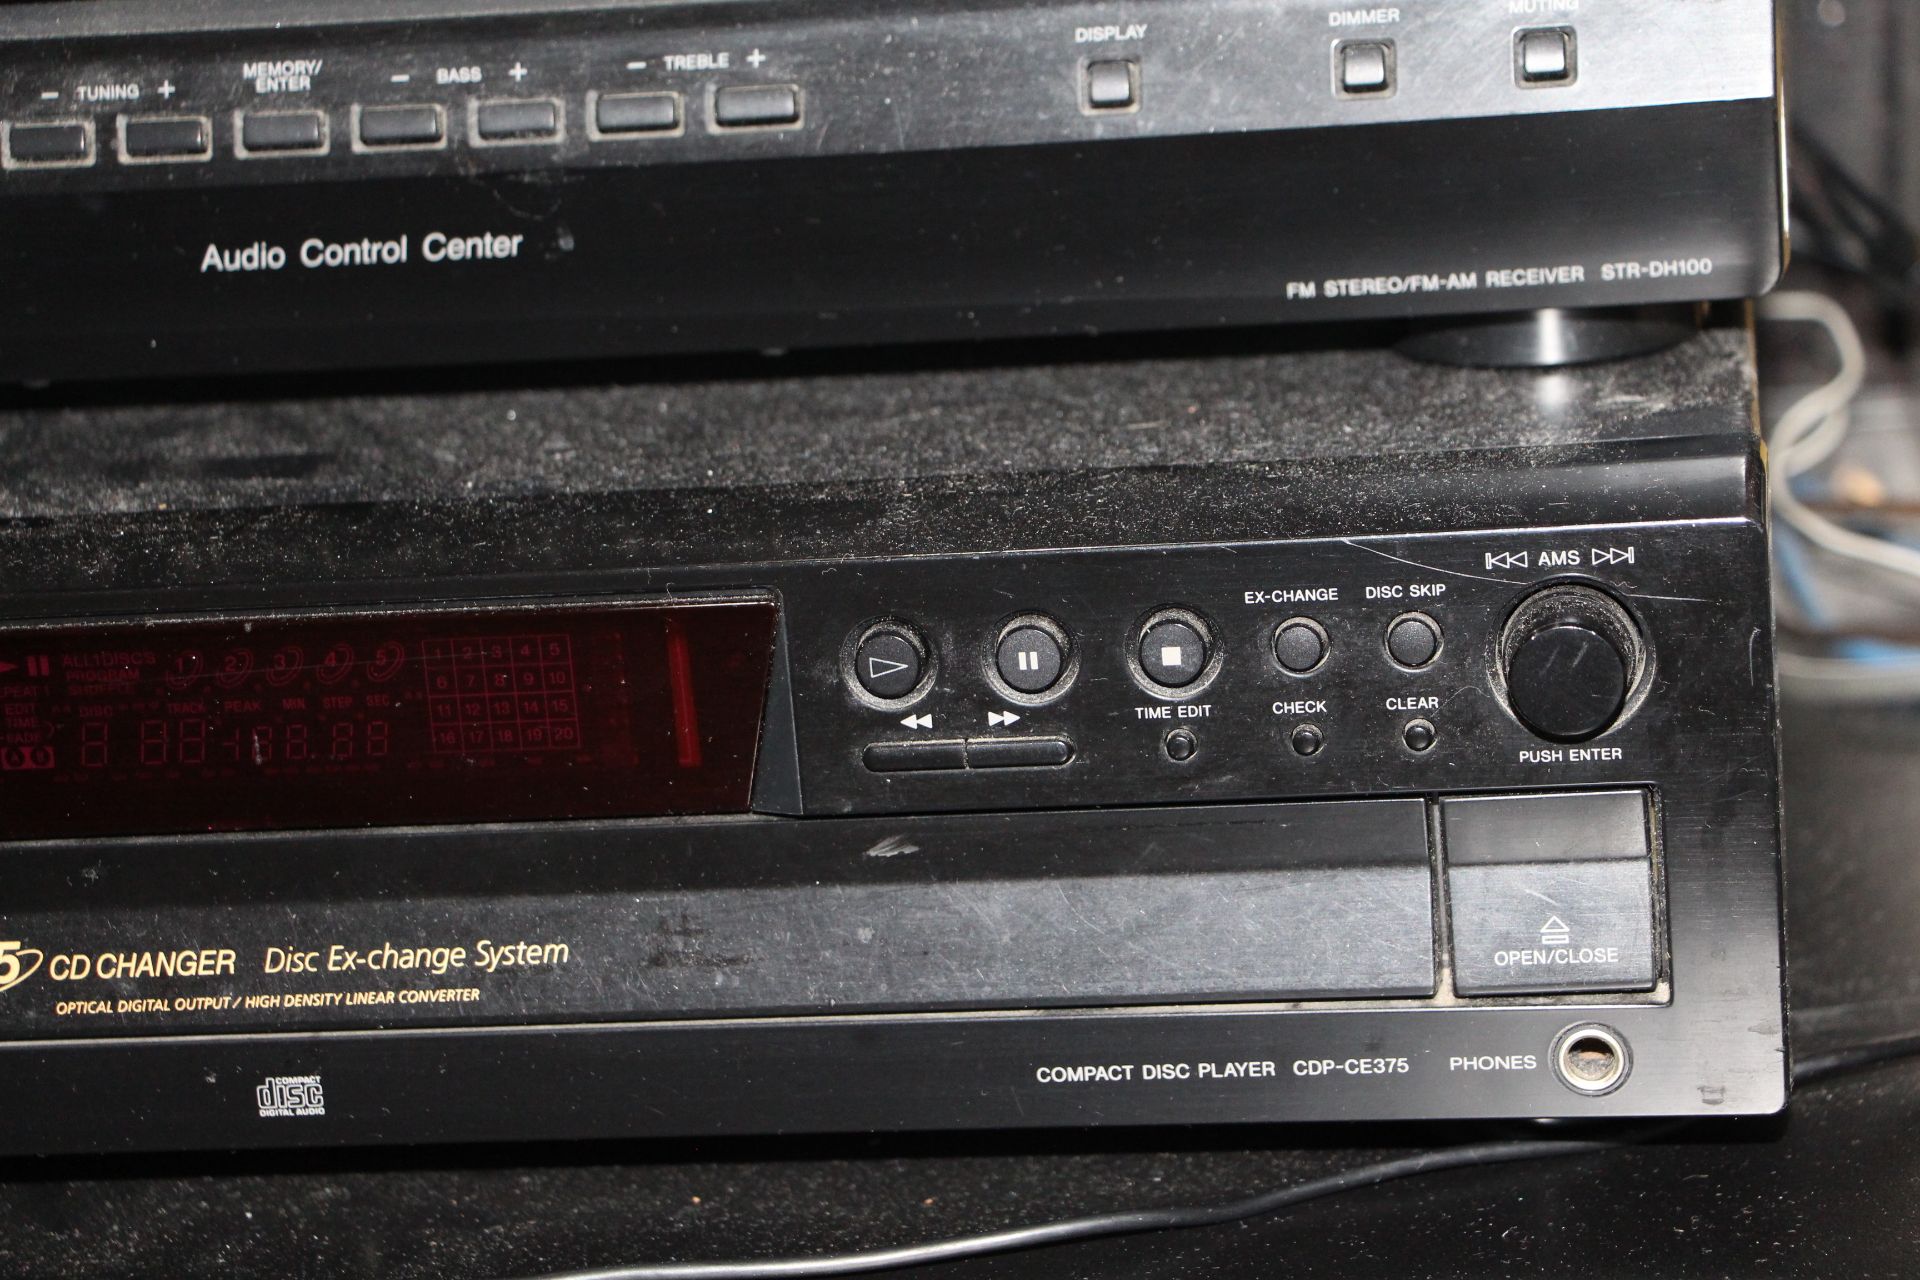 Lot Sony STR-DH100 receiver audio control center & Sony CPD-CD375 5 CD disc changer player - Image 2 of 2